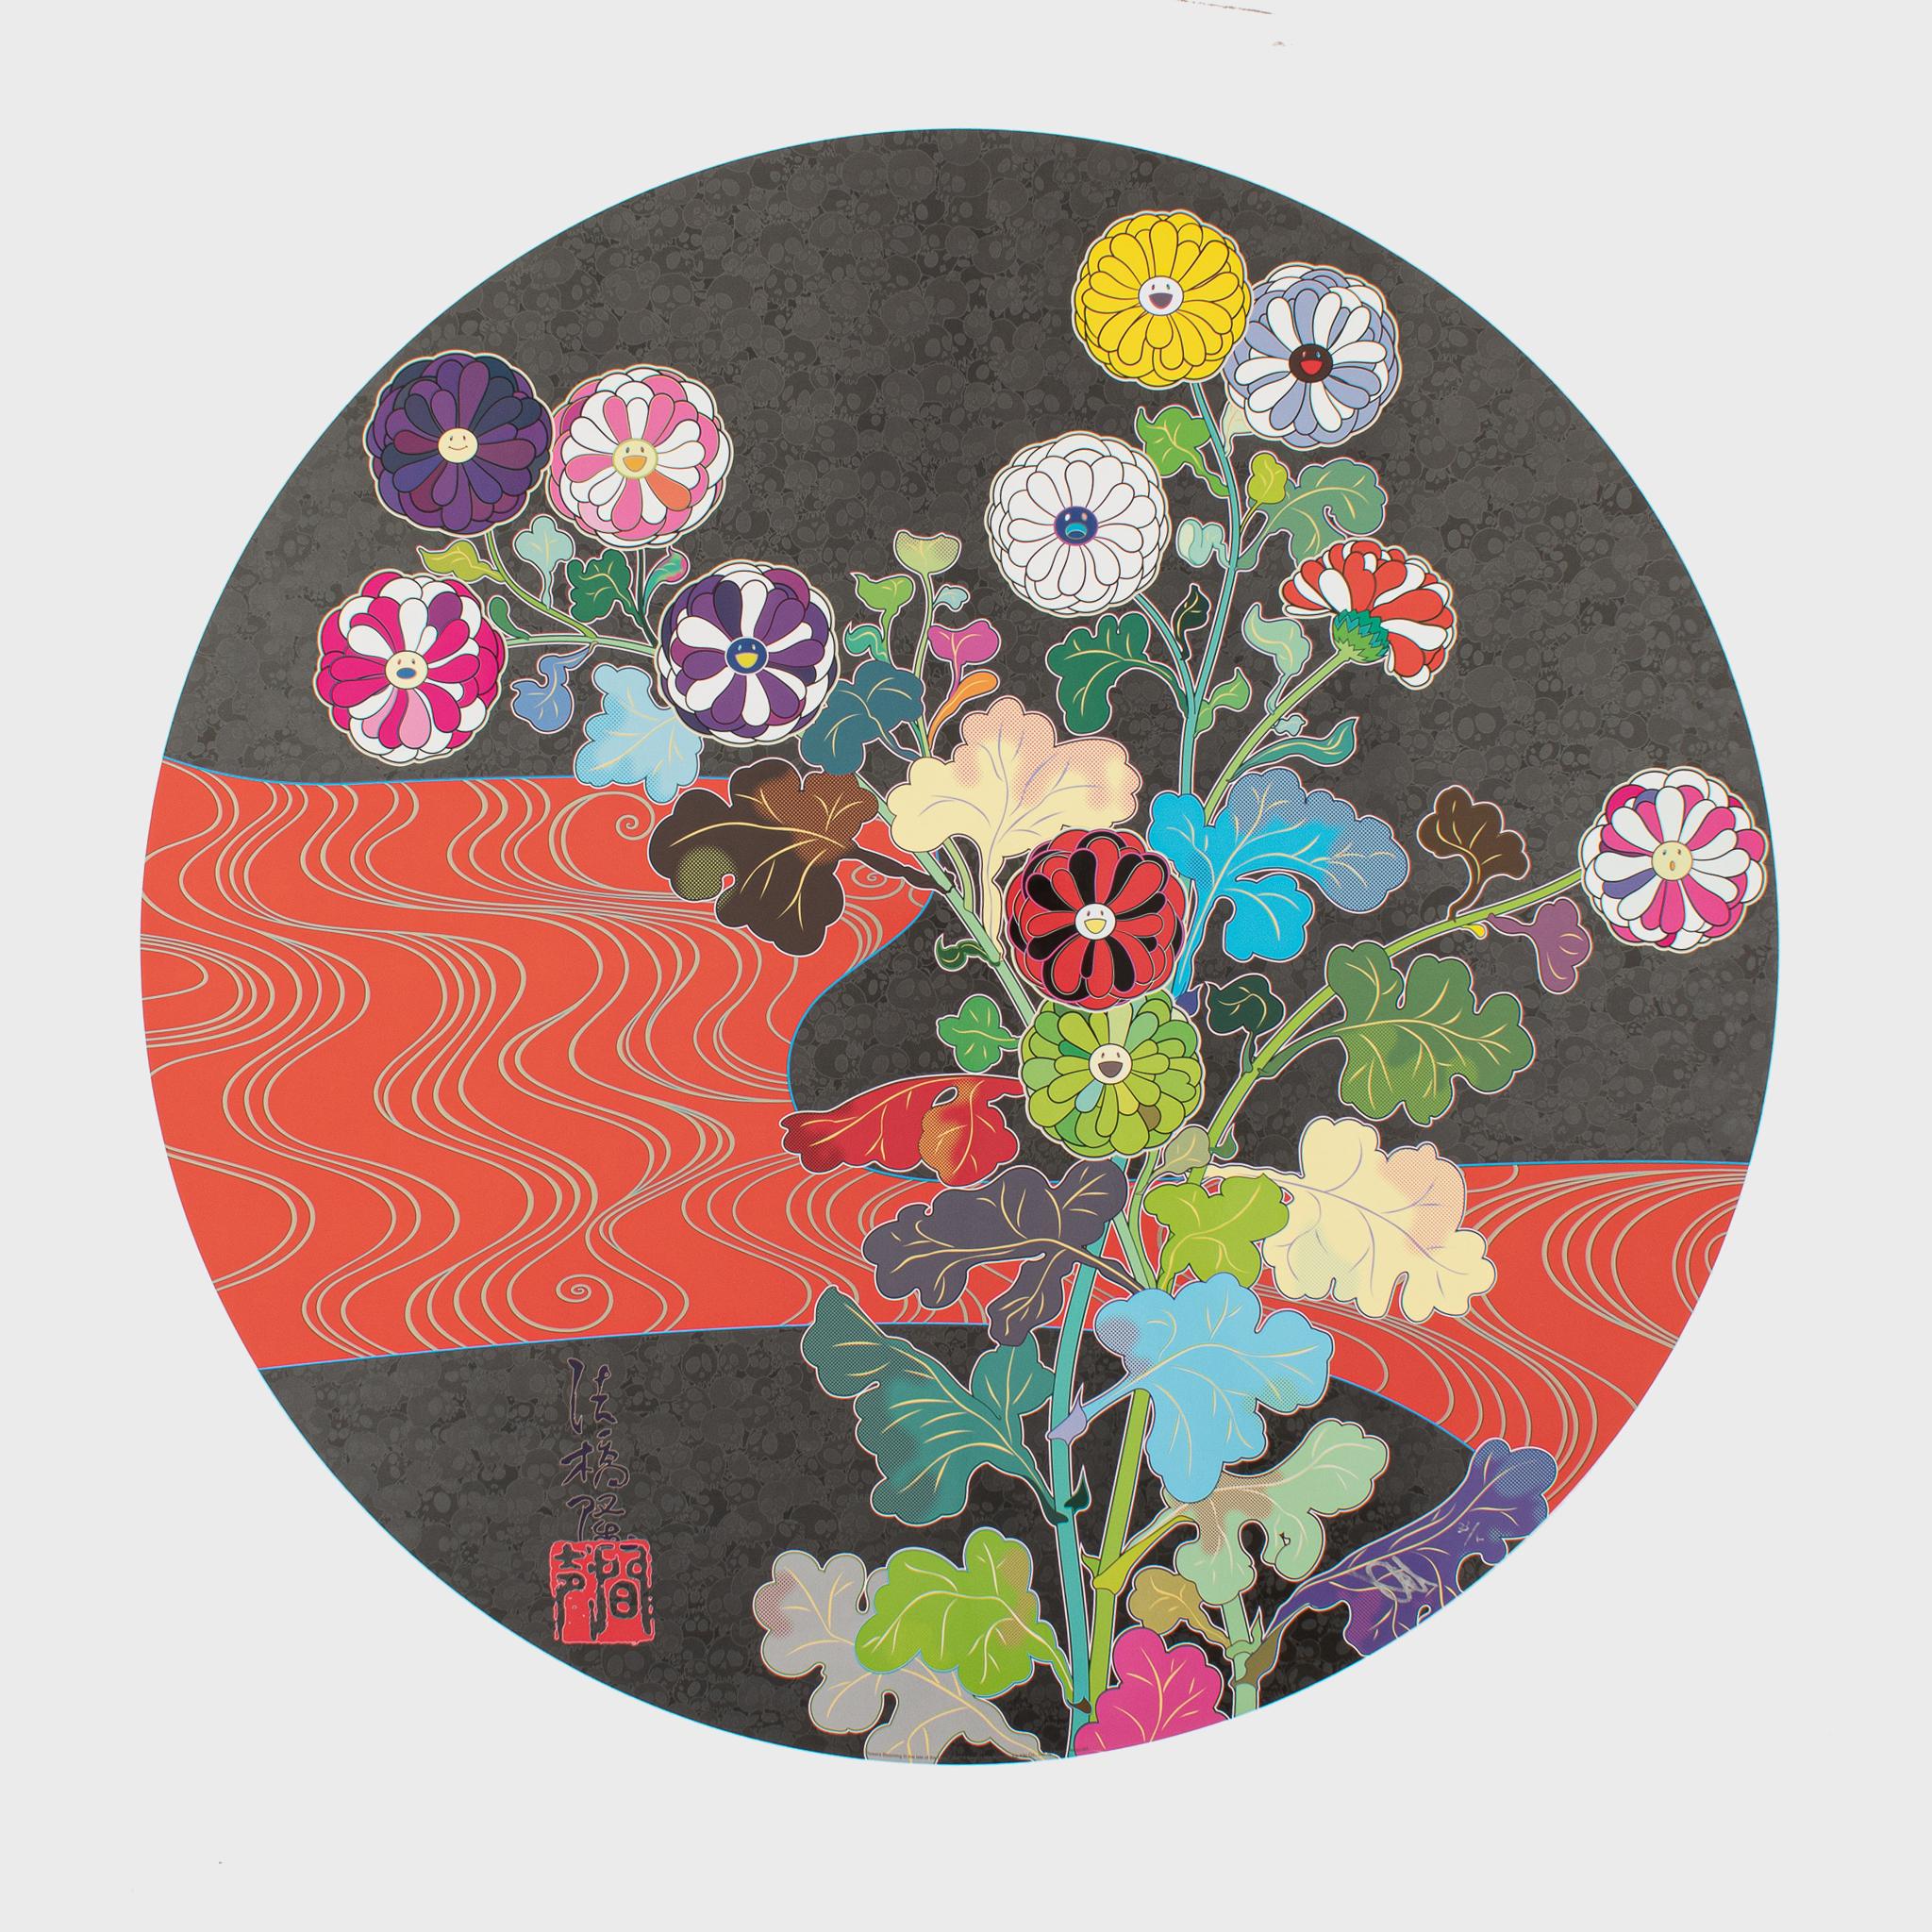 Takashi Murakami Abstract Print - Flowers Blooming in the Isle of the Dead